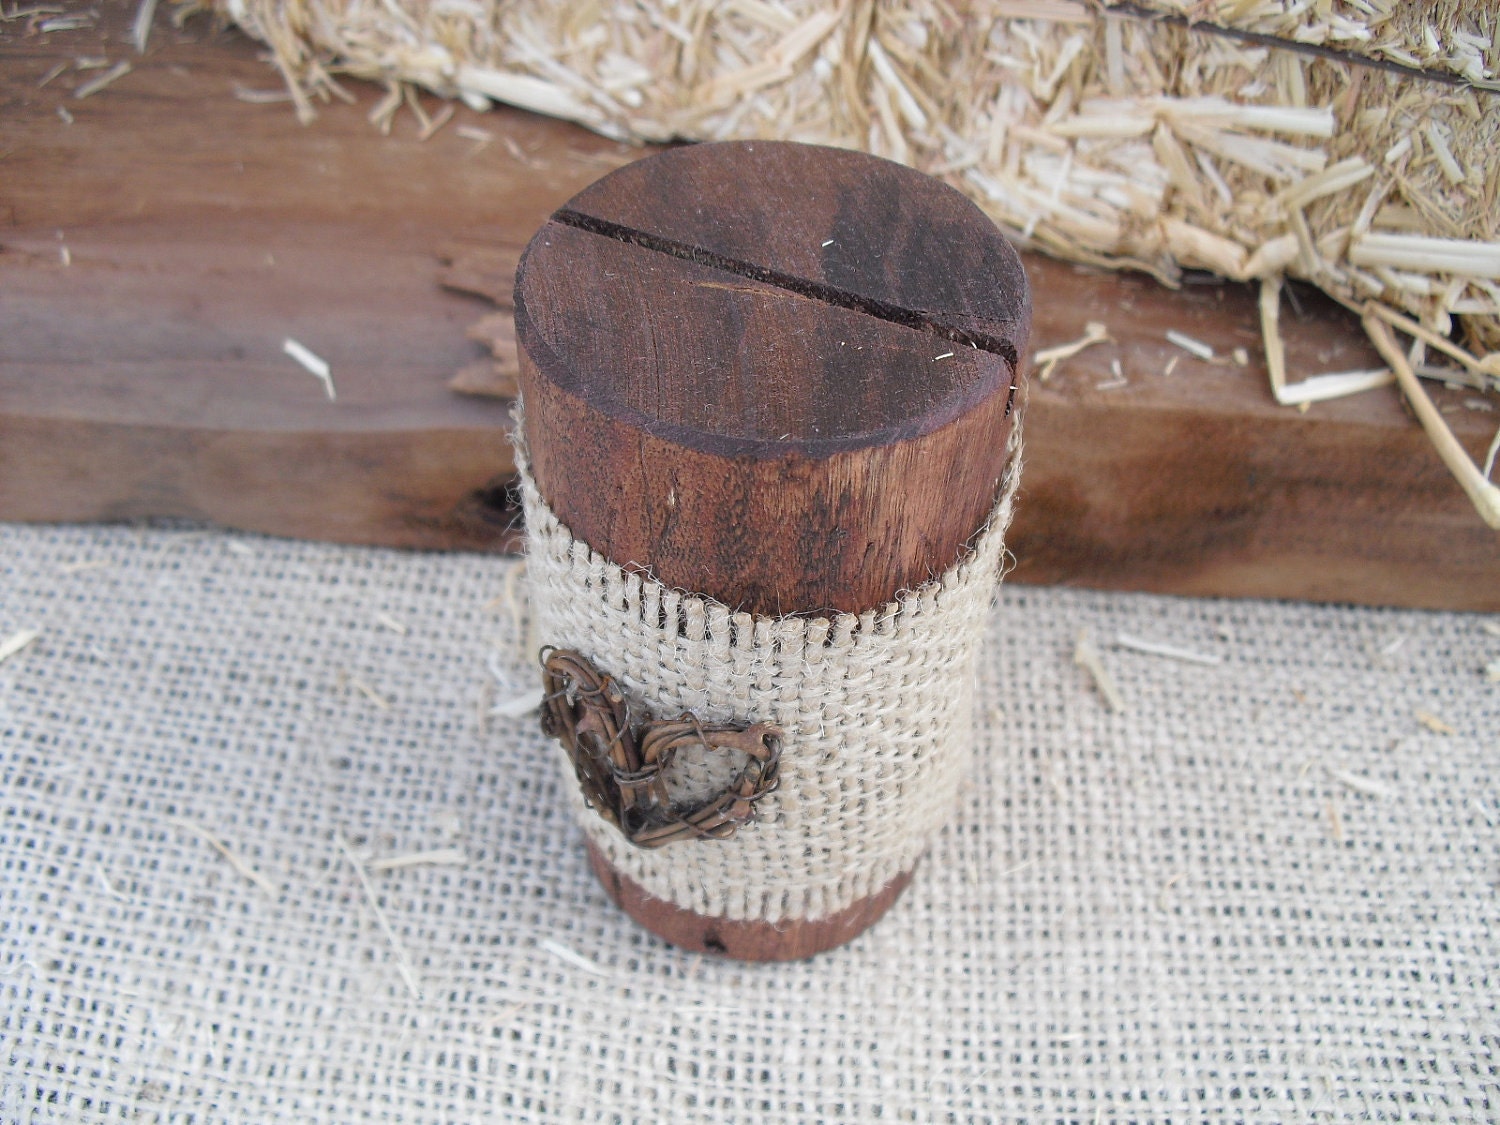 SET OF 12 Rustic Wood Table Number Holders with Grapvine Heart Item 1259